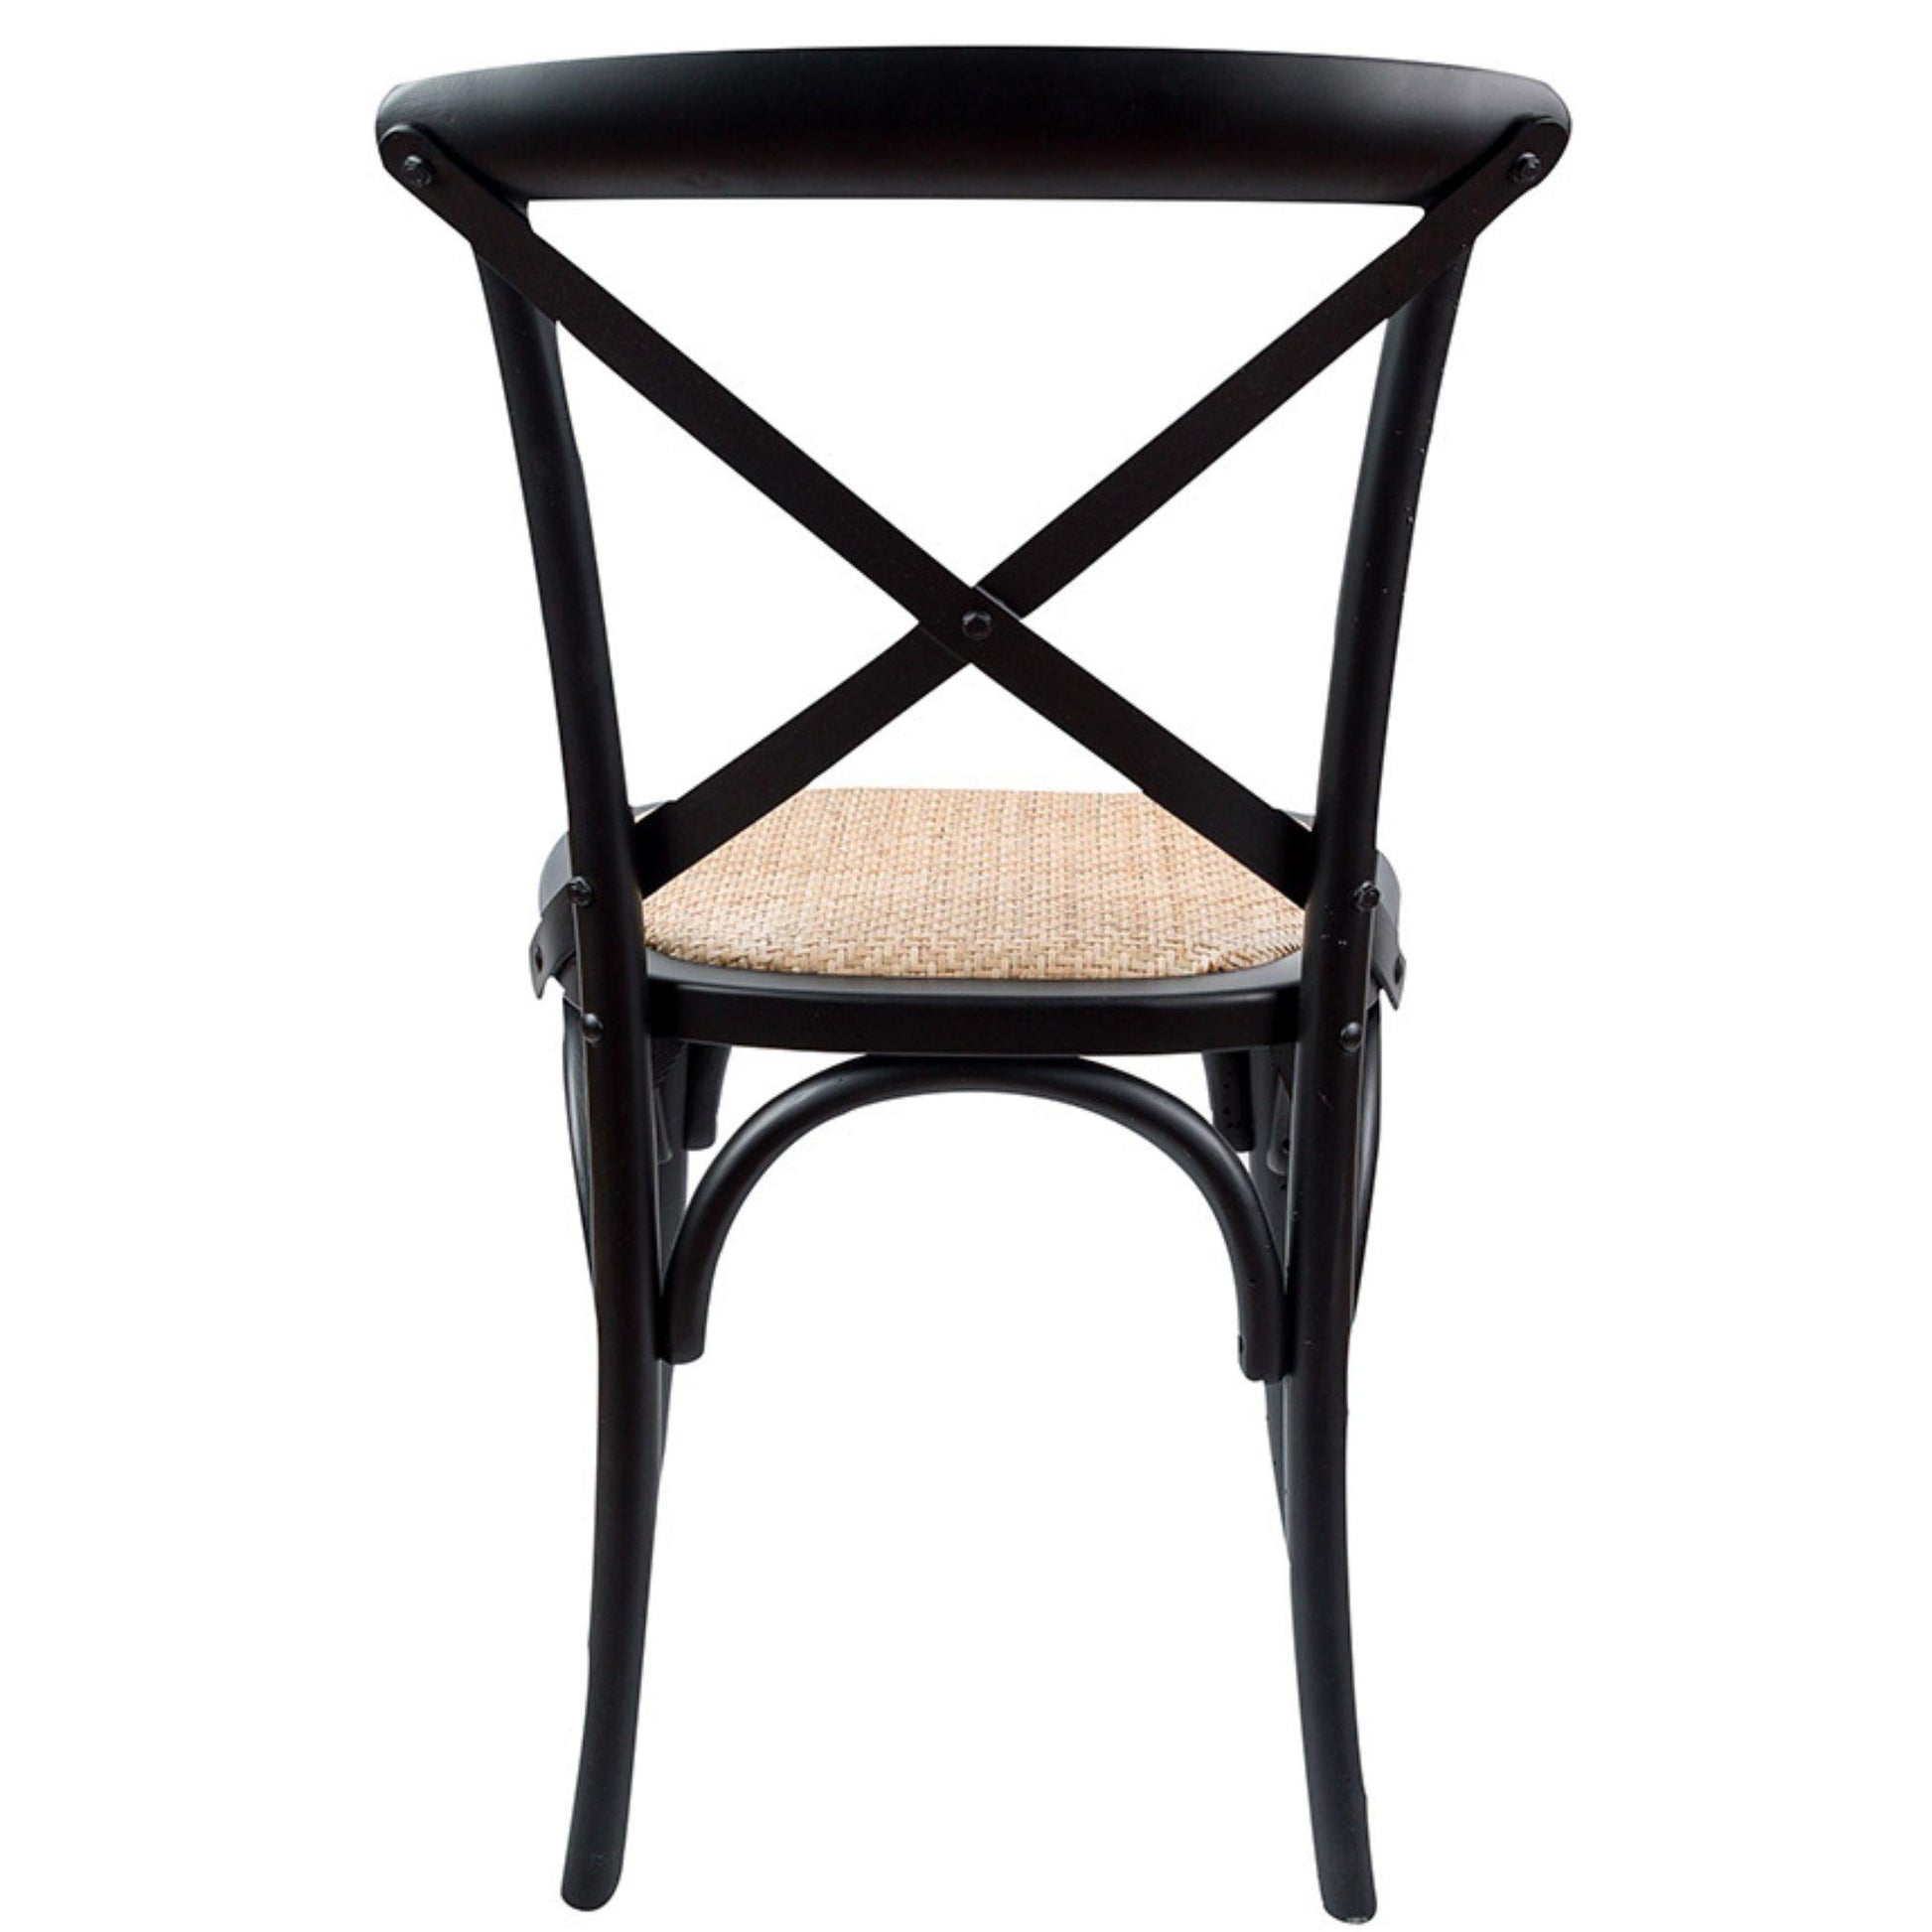 Aster Crossback Dining Chair Set of 8 Solid Birch Timber Wood Ratan Seat - Black